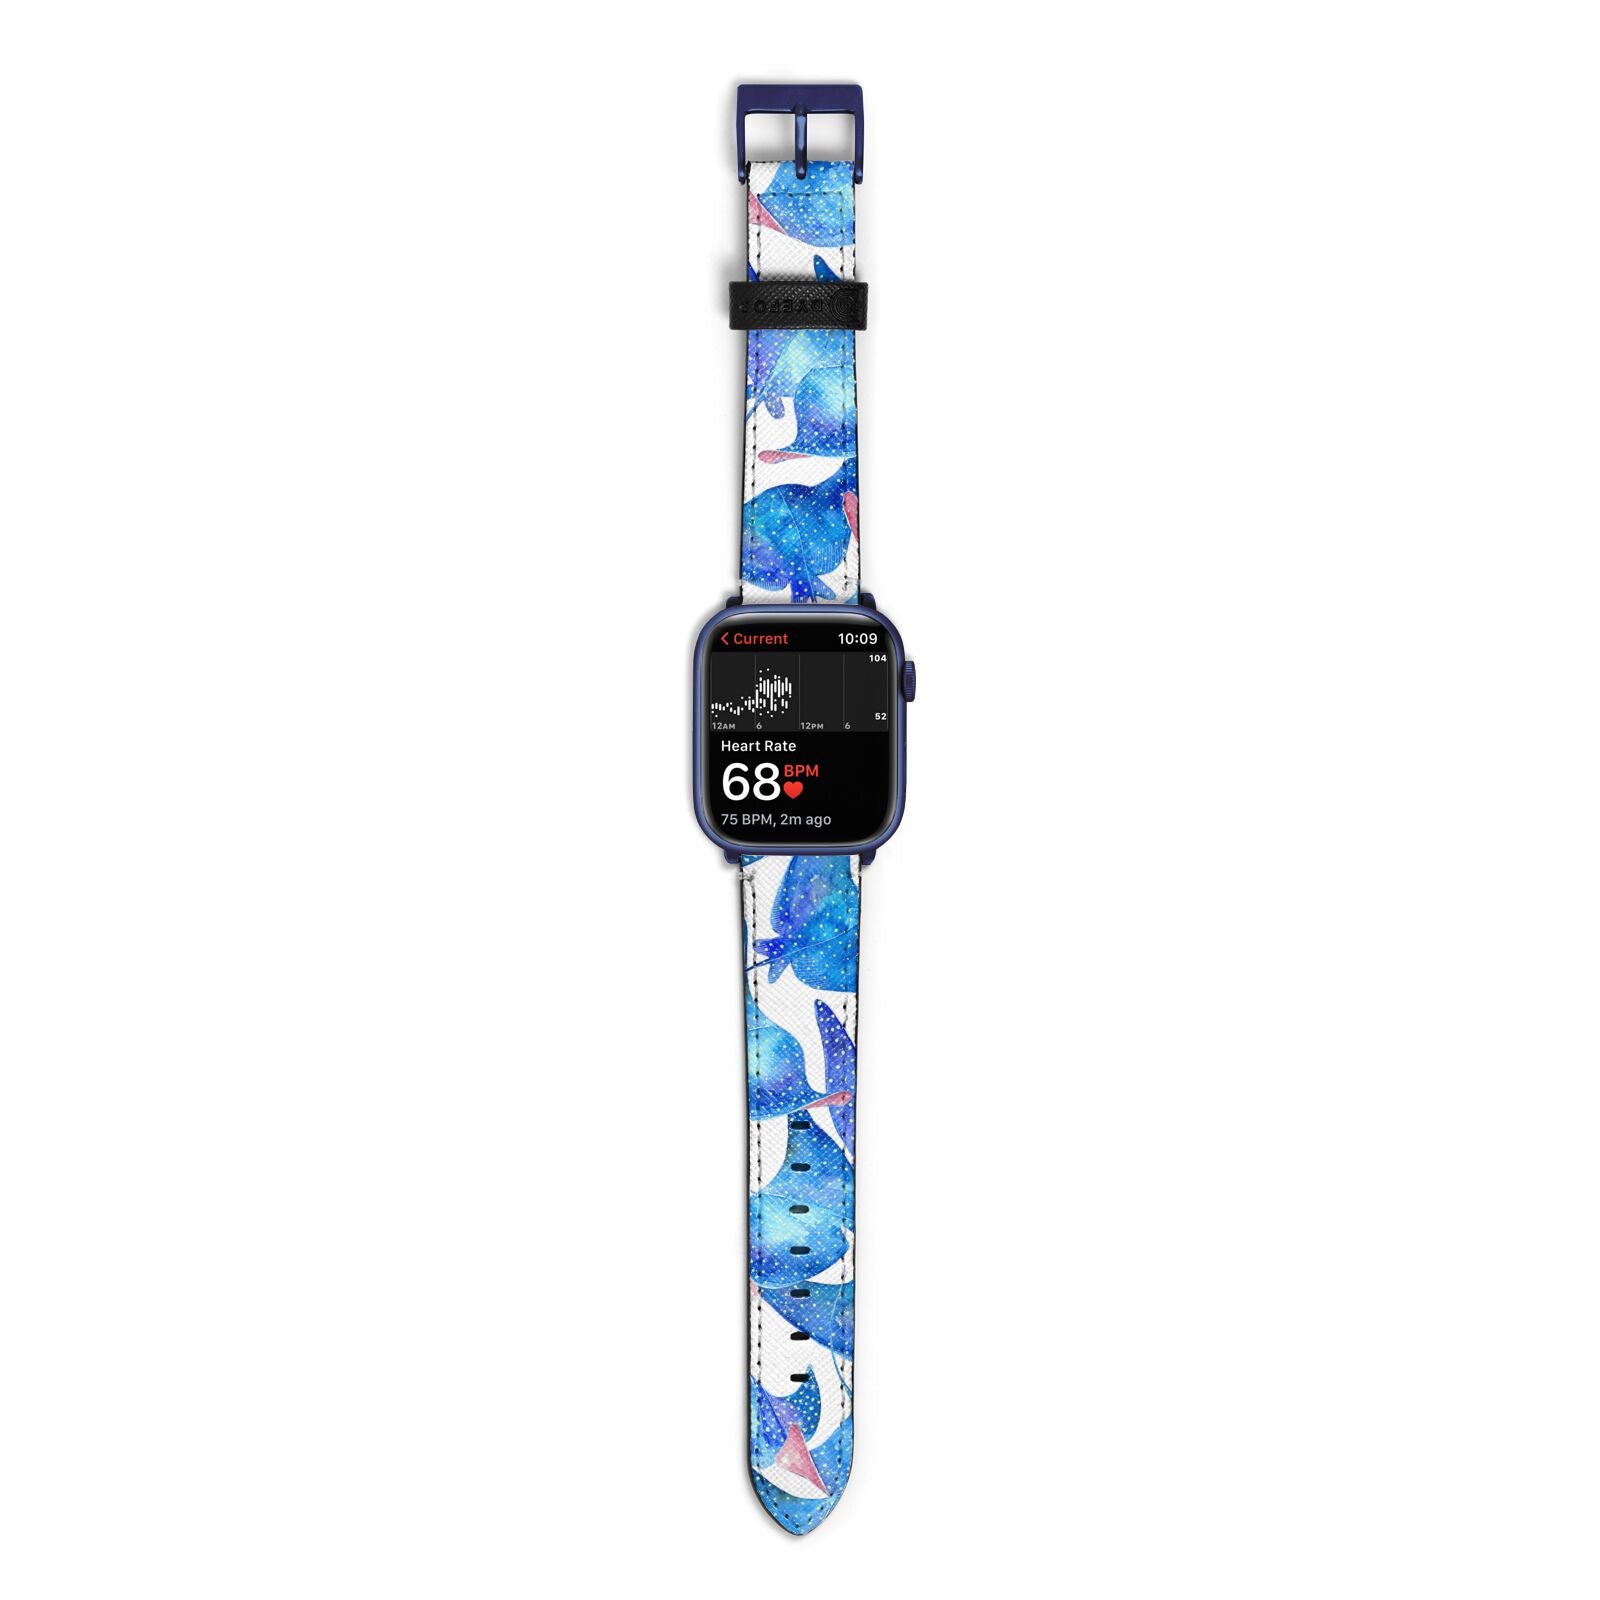 Devil Fish Apple Watch Strap Size 38mm with Blue Hardware